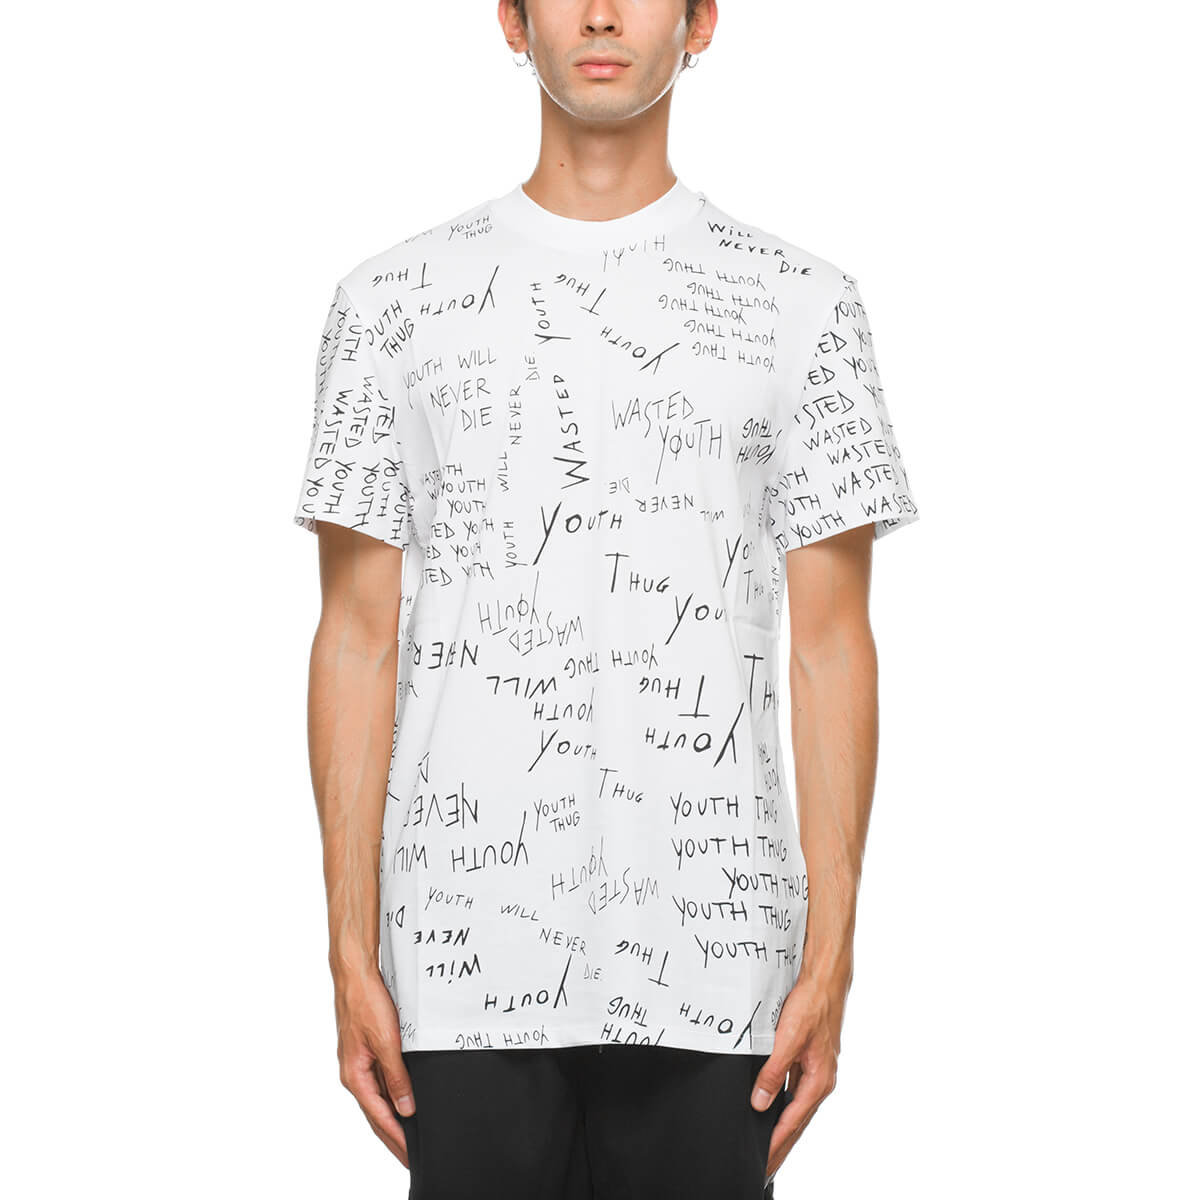 MNSTR YOUTH Writing tee